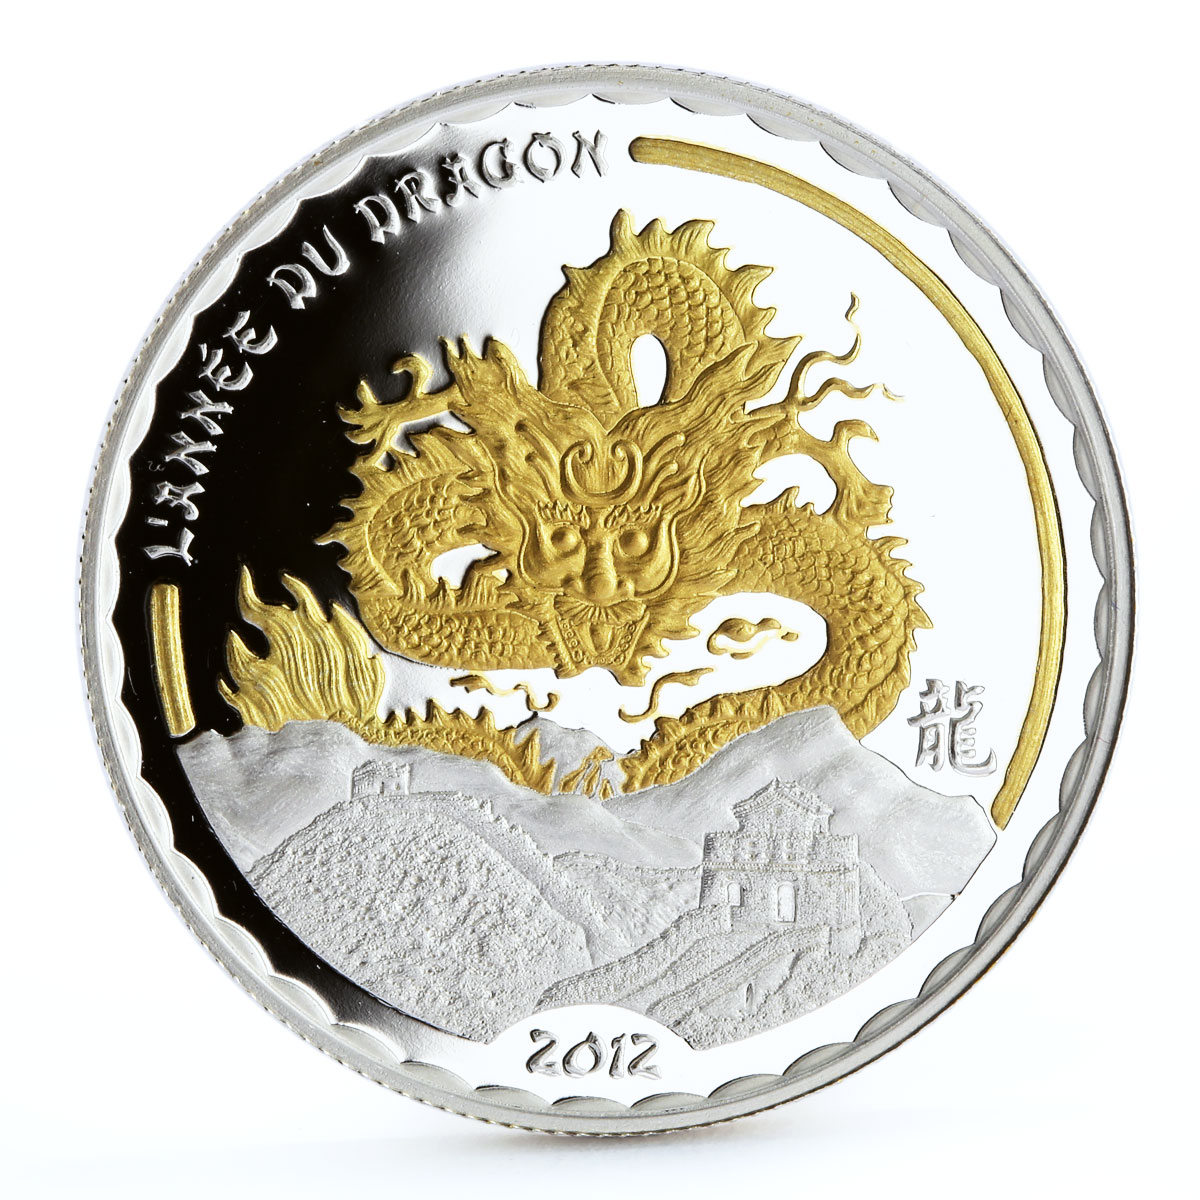 Cameroon 1000 francs Year of the Dragon gilded silver coin 2012